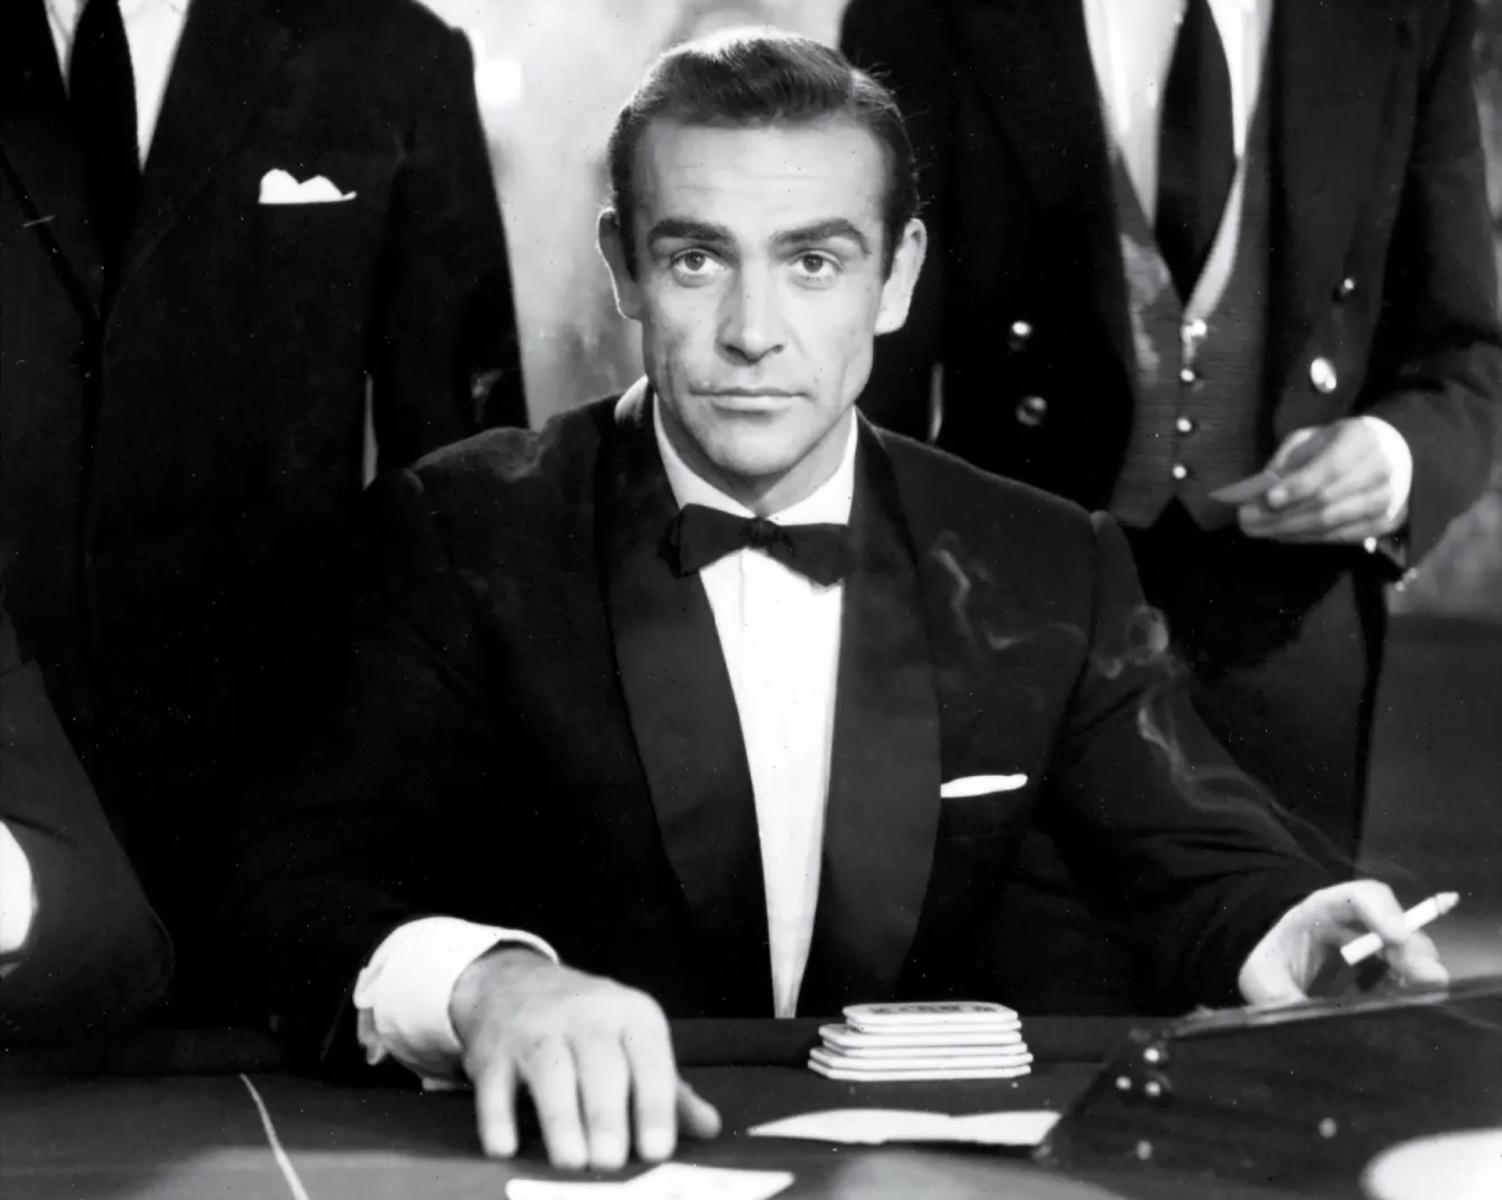 Sean Connery's 5 Greatest Films: From the Classics to the Contemporary, These are Must-Sees - image 1